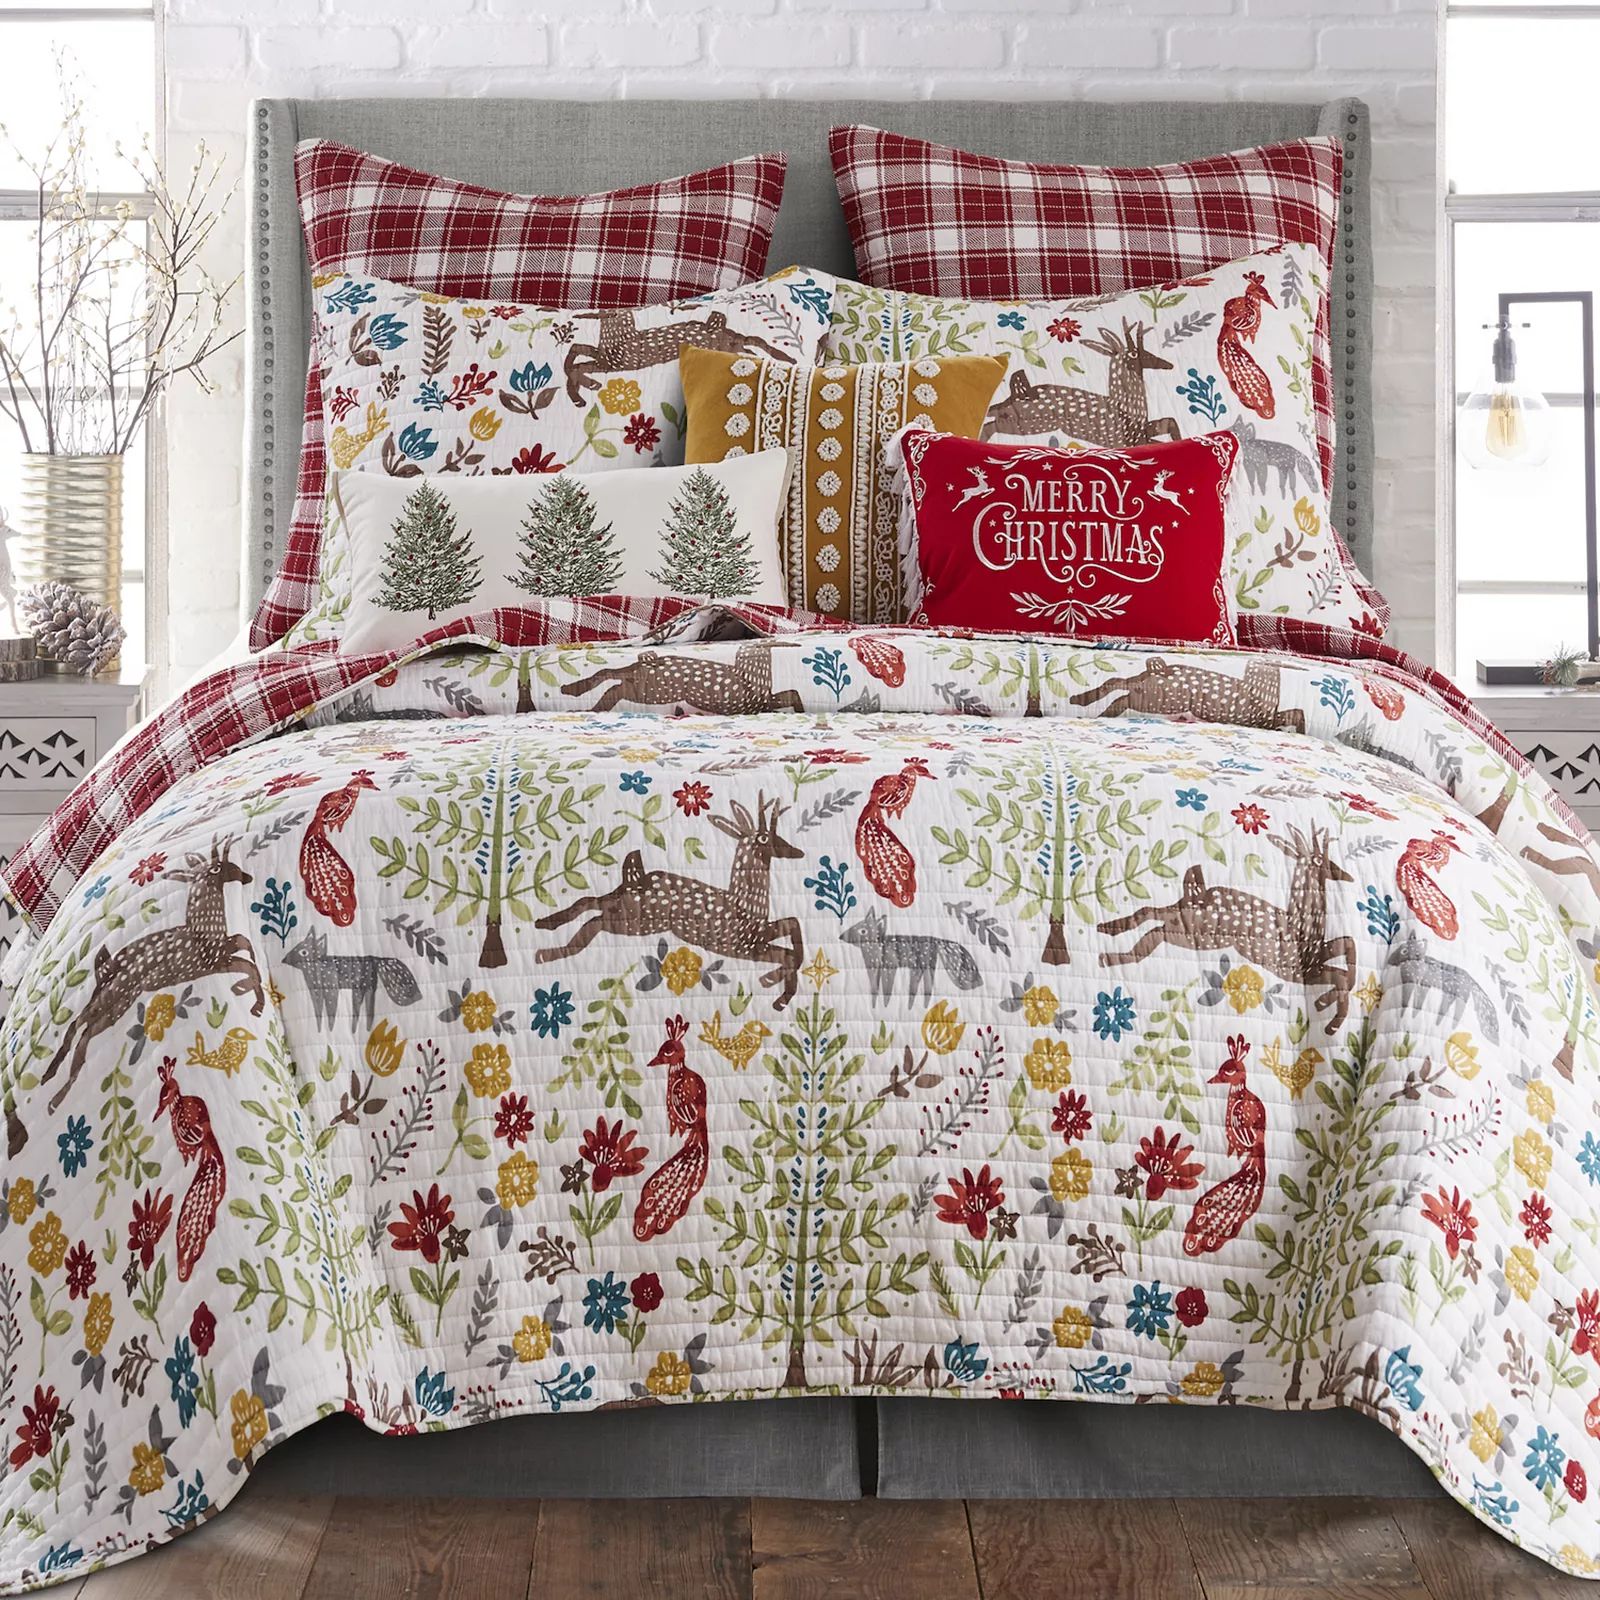 Levtex Home Folk Deer Quilt Set with Euro Shams, Multicolor, Twin | Kohl's